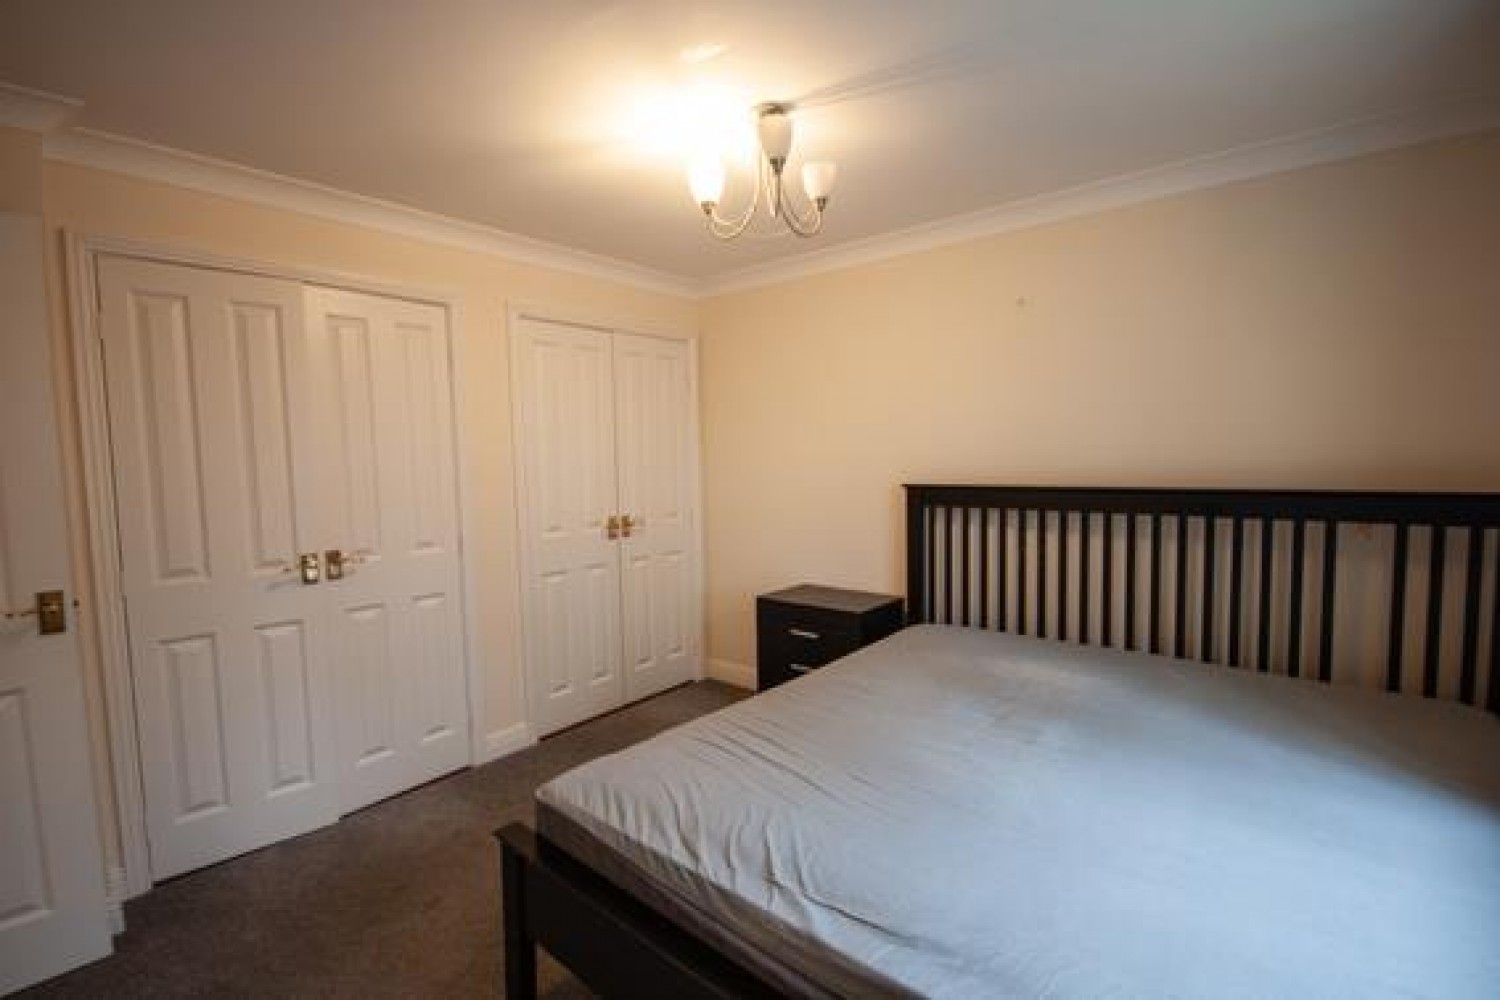 Silverdale Drive, Burntwood, WS7 3UY